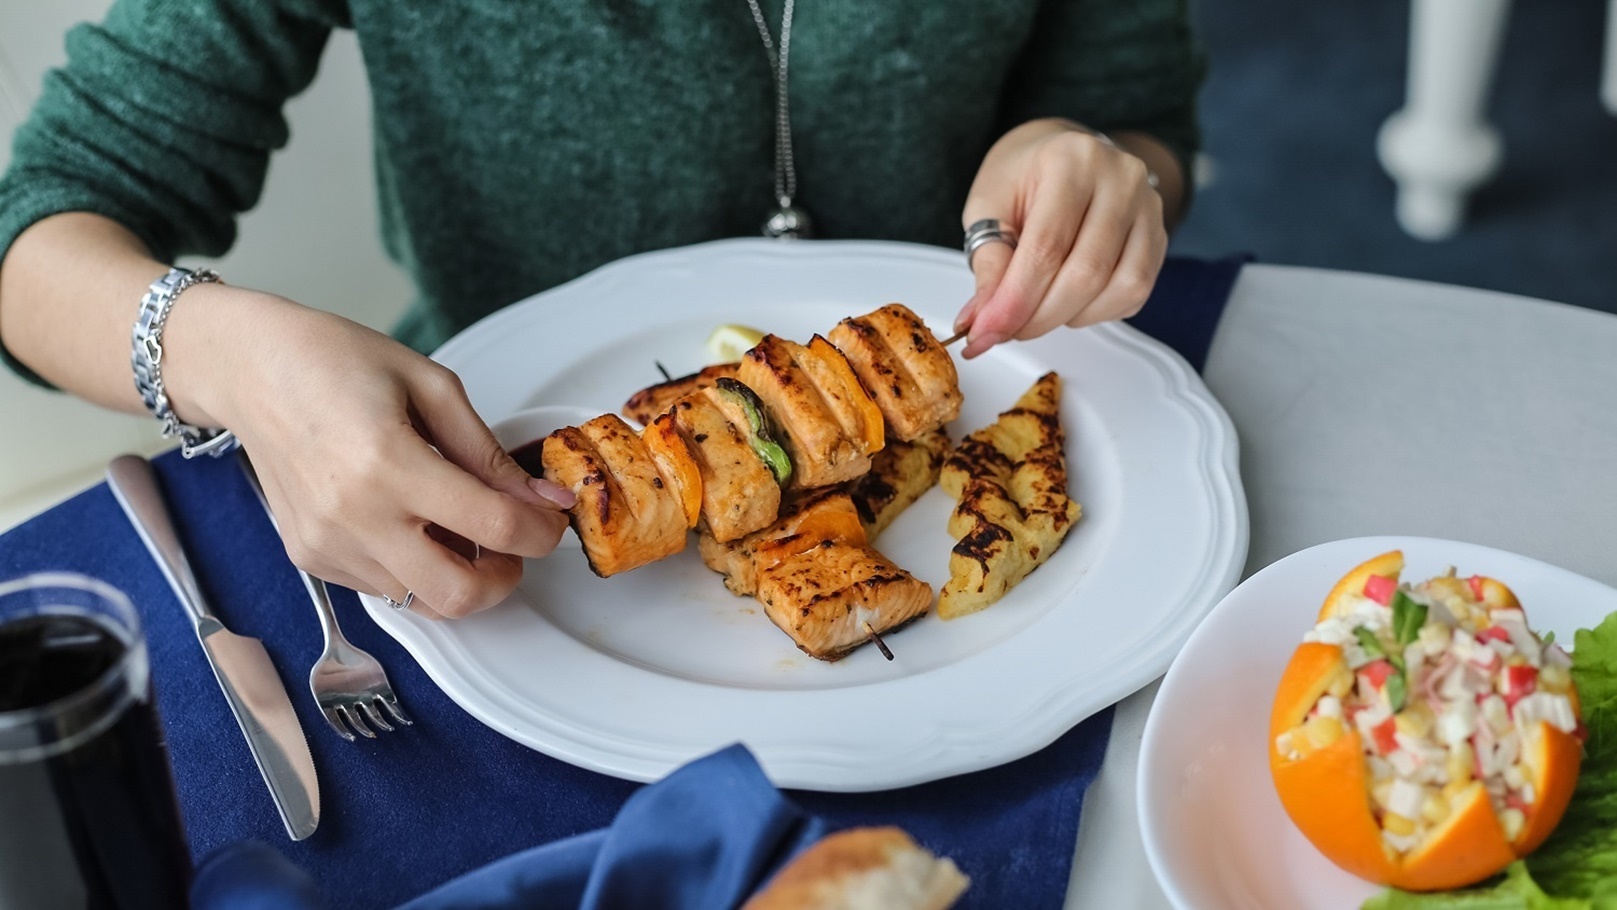 side-view-woman-eating-grilled-fish-on-skewers-wit-2021-08-31-16-12-55-utc